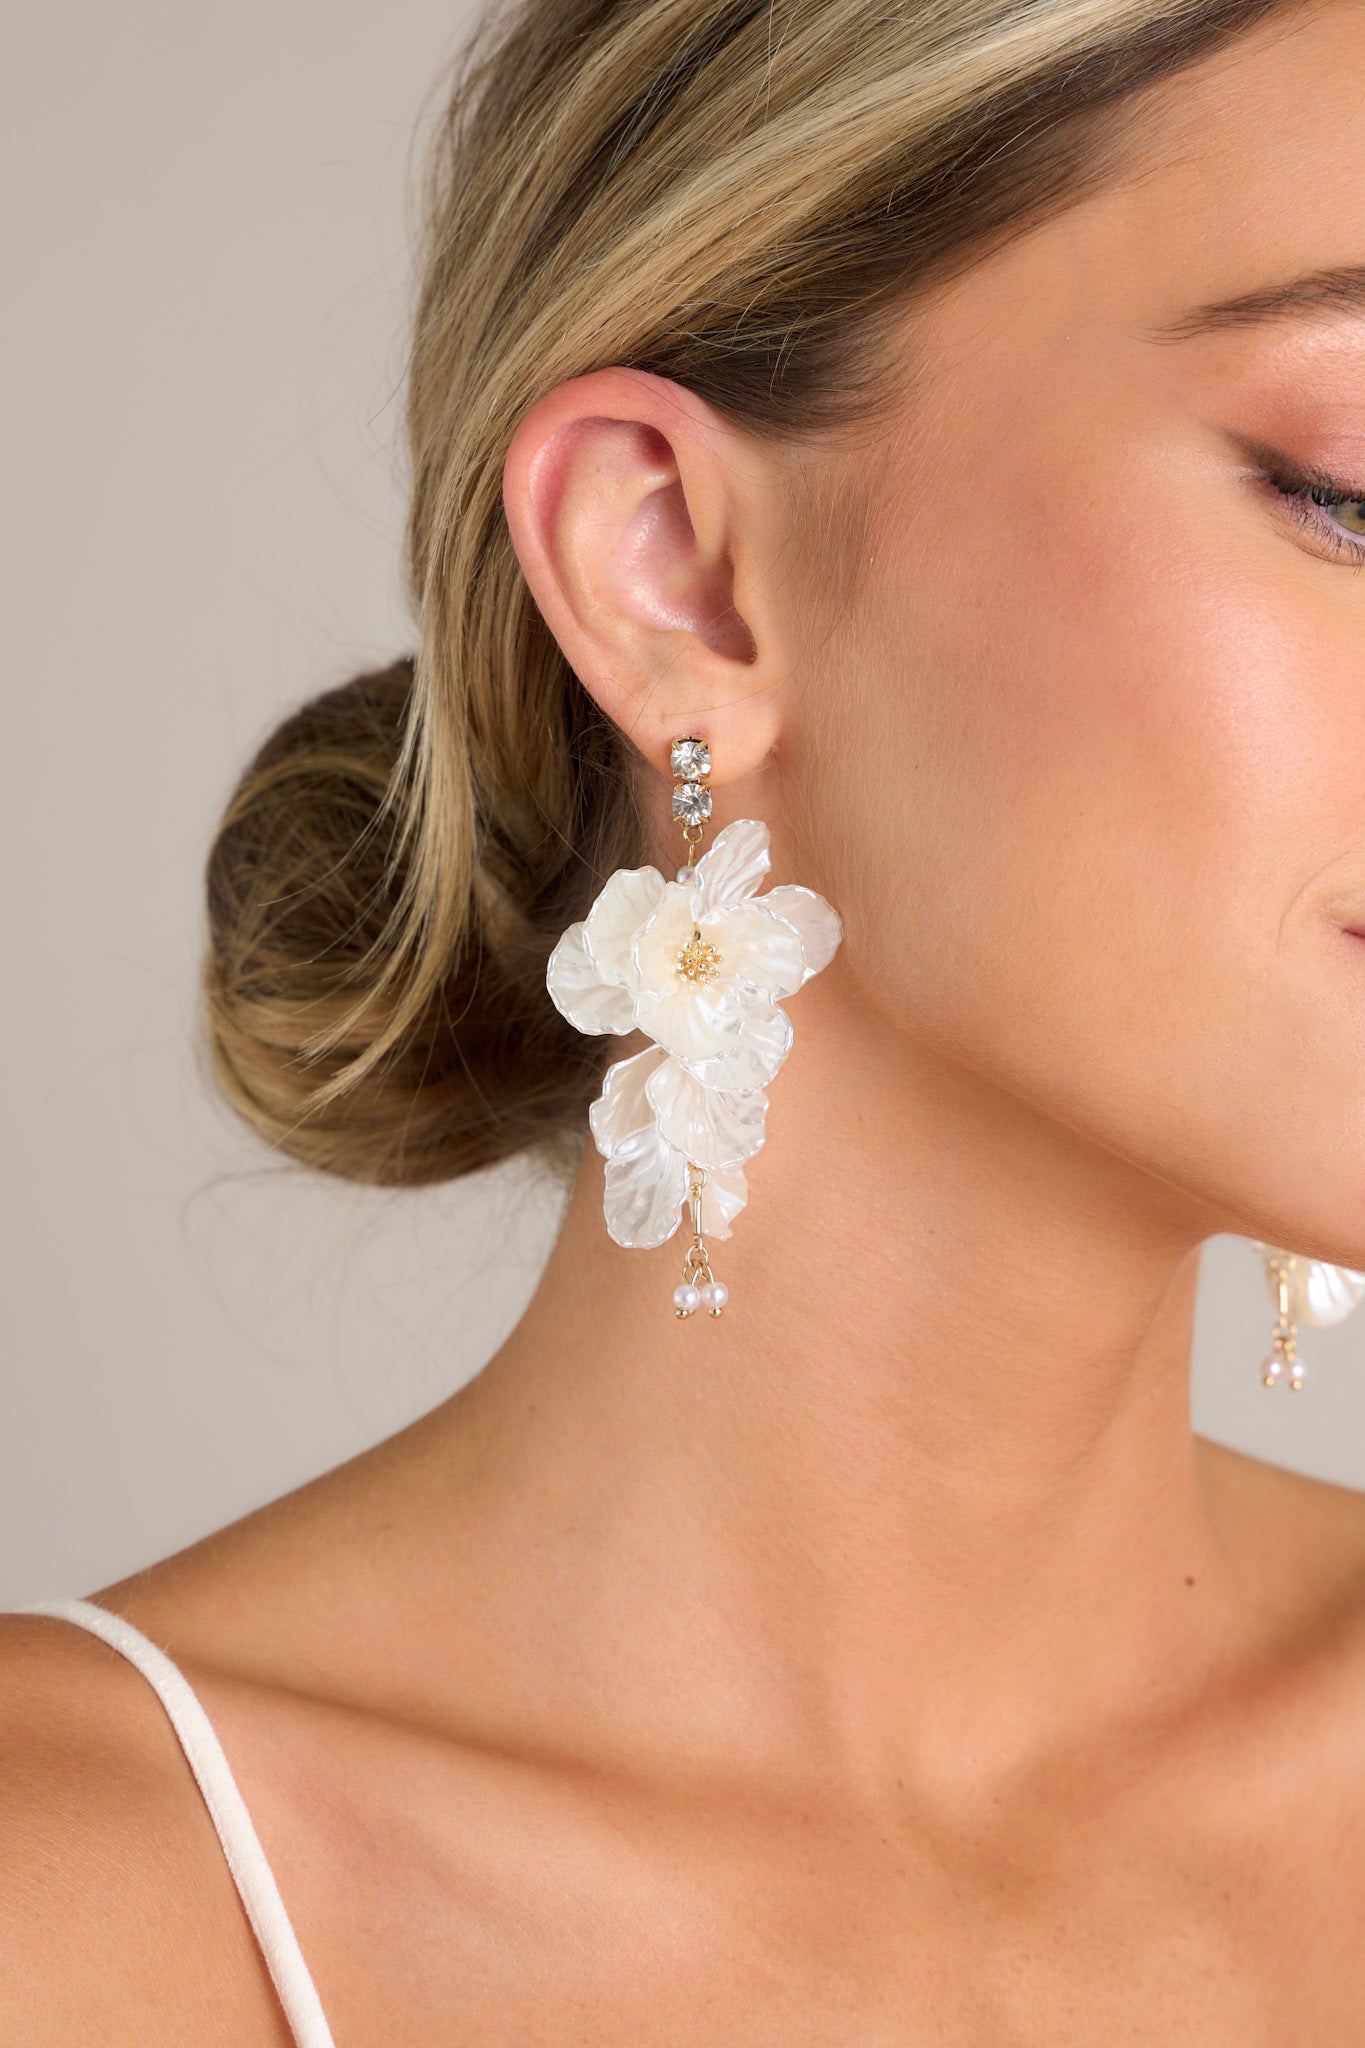 These flower drop earrings feature a diamond studs, gold hardware, pearlescent petals, and a pearl drop.